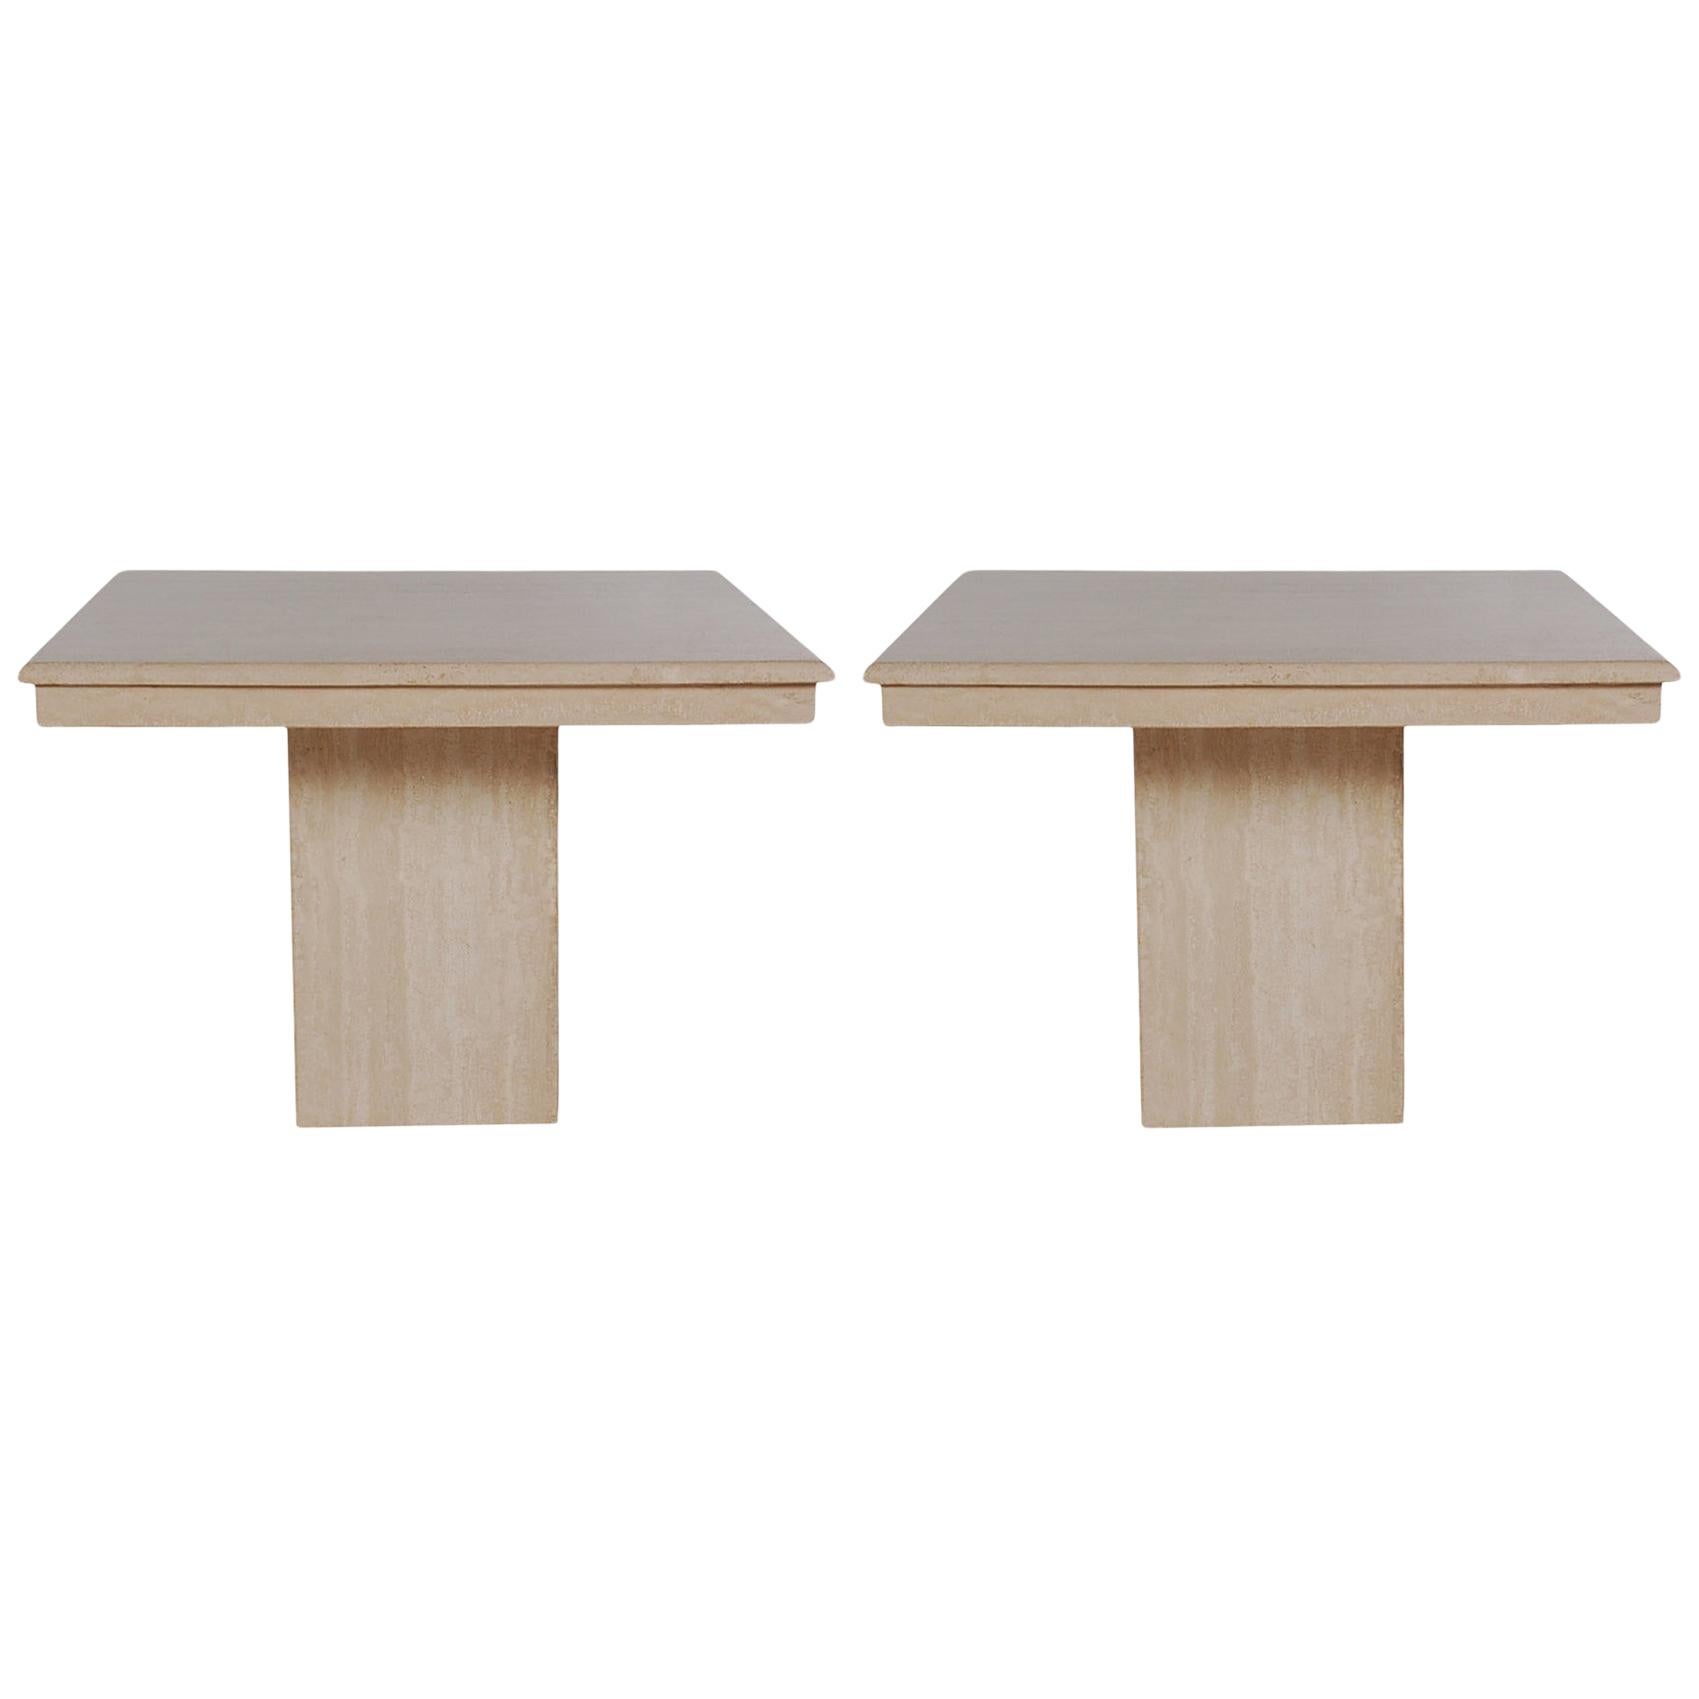 Pair of Mid-Century Modern Italian Travertine Marble End Tables or Side Tables